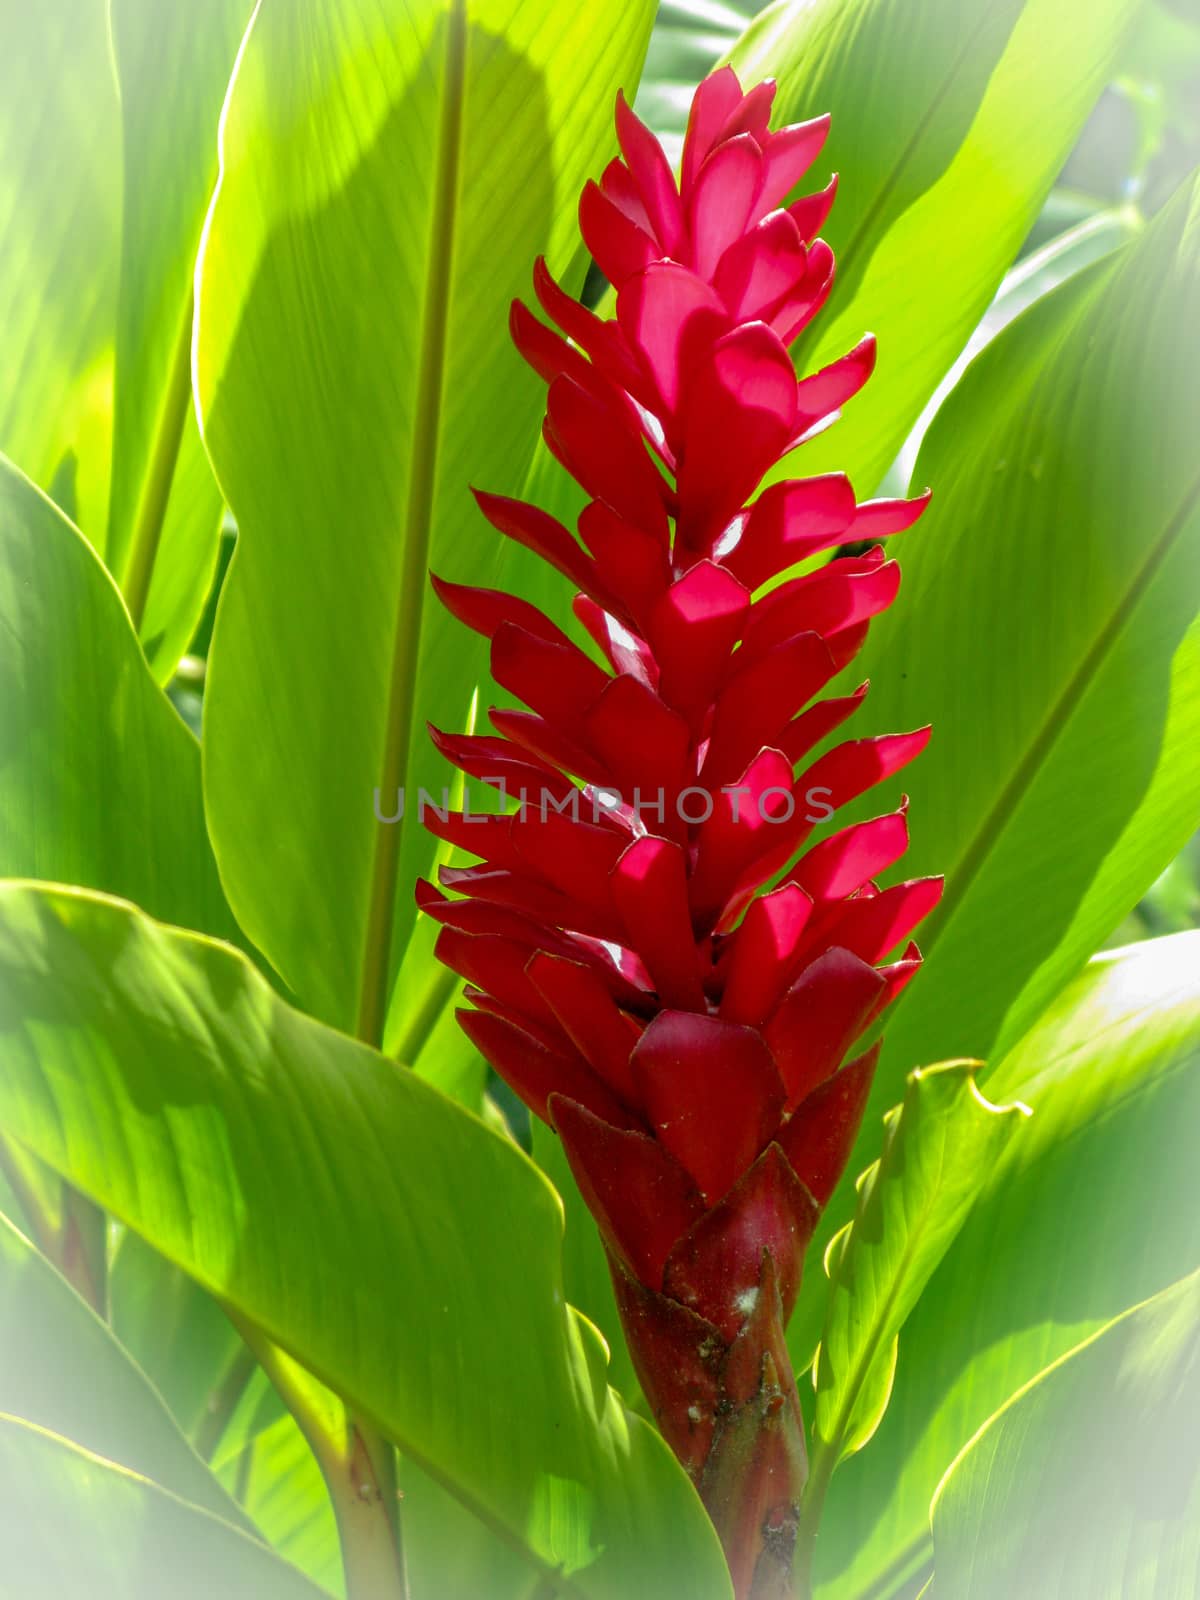 Alpinia purpurata, red ginger, also called ostrich plume and pink cone ginger, are native Malaysian plants with showy flowers on long brightly colored red bracts. They look like the bloom, but the true flower is the small white flower on top. It has cultivars called Jungle King and Jungle Queen.